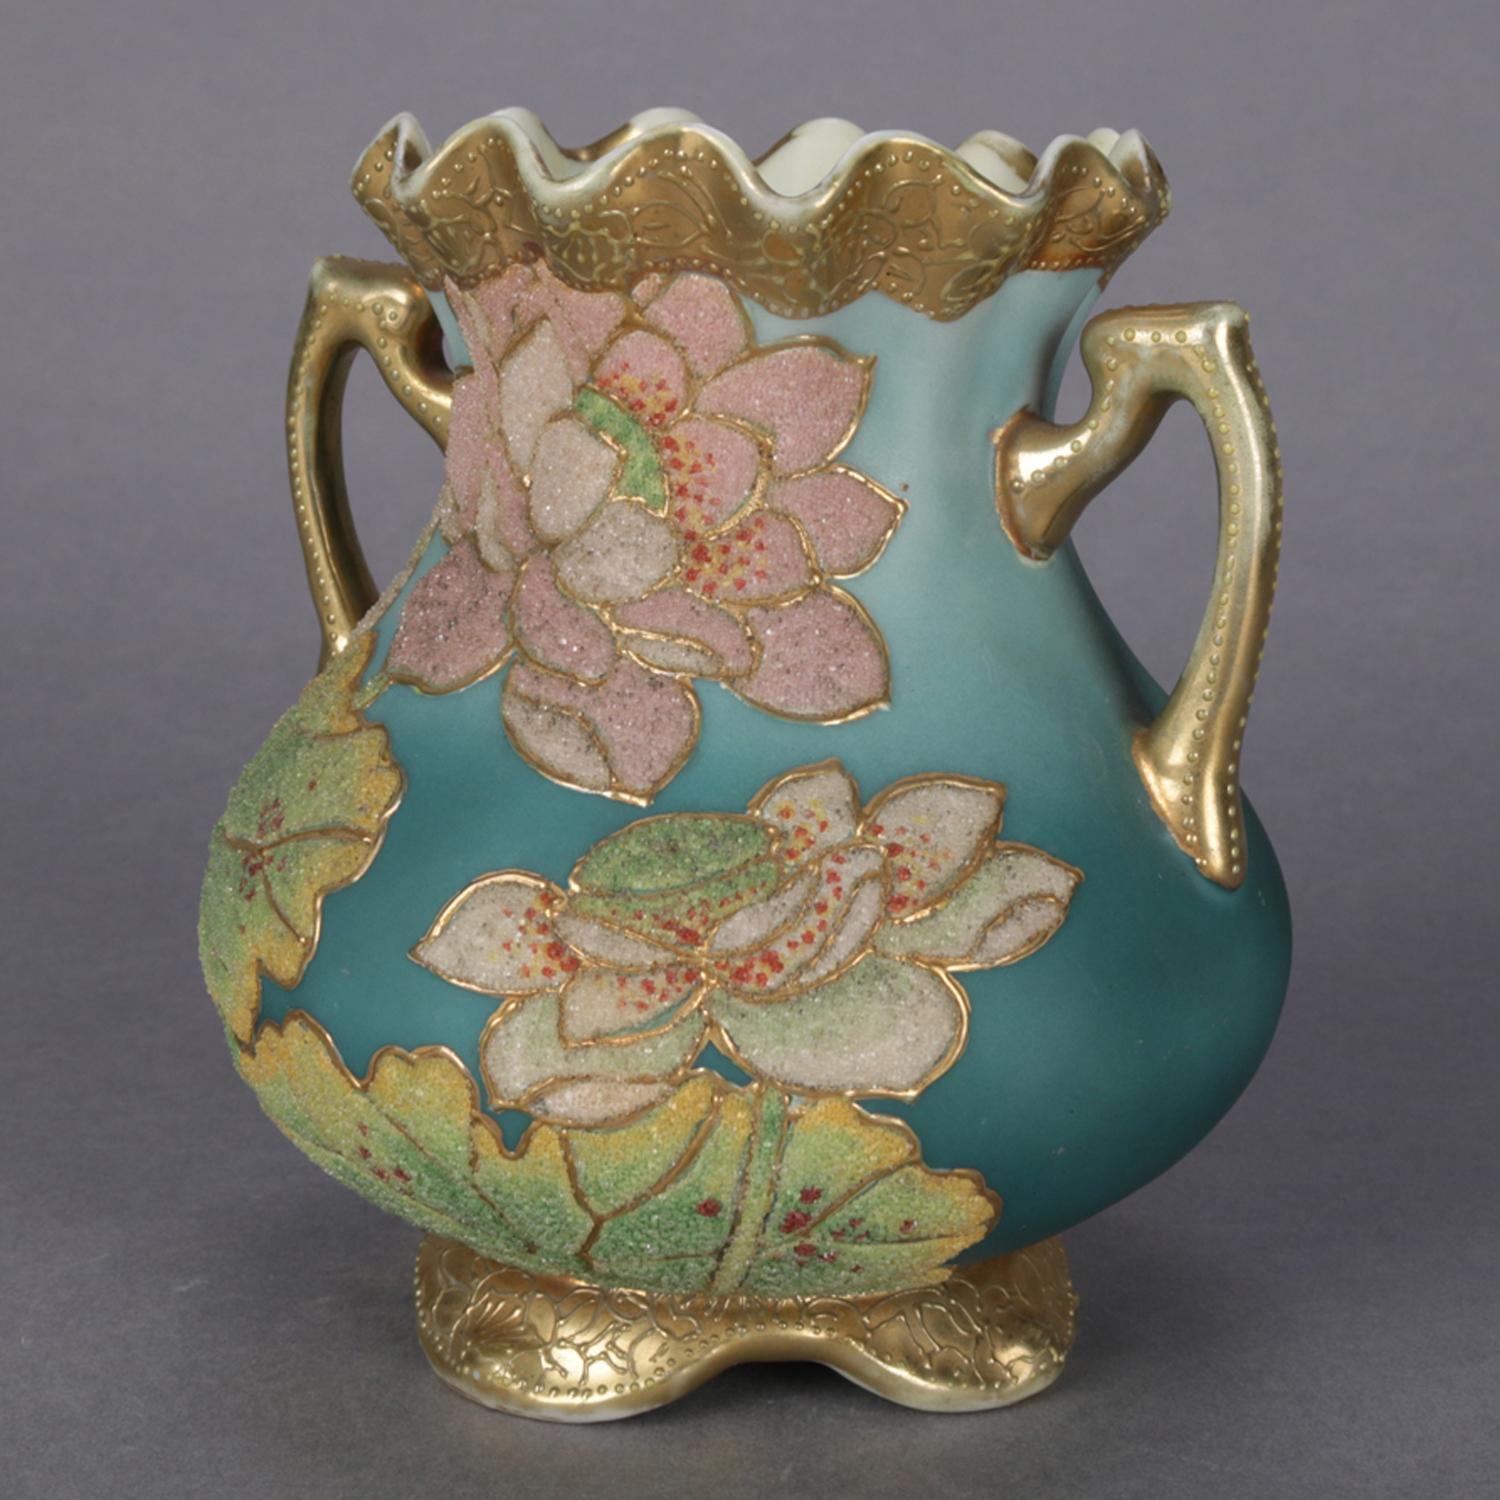 An antique Japanese Art Deco Nippon Coraline decorated vase features double handled bulbous form with ruffled rim and scroll form feet, all-over moriage decorated with flowers and heavy gilt banding, marked on base, circa 1920.

Measures: 5.5